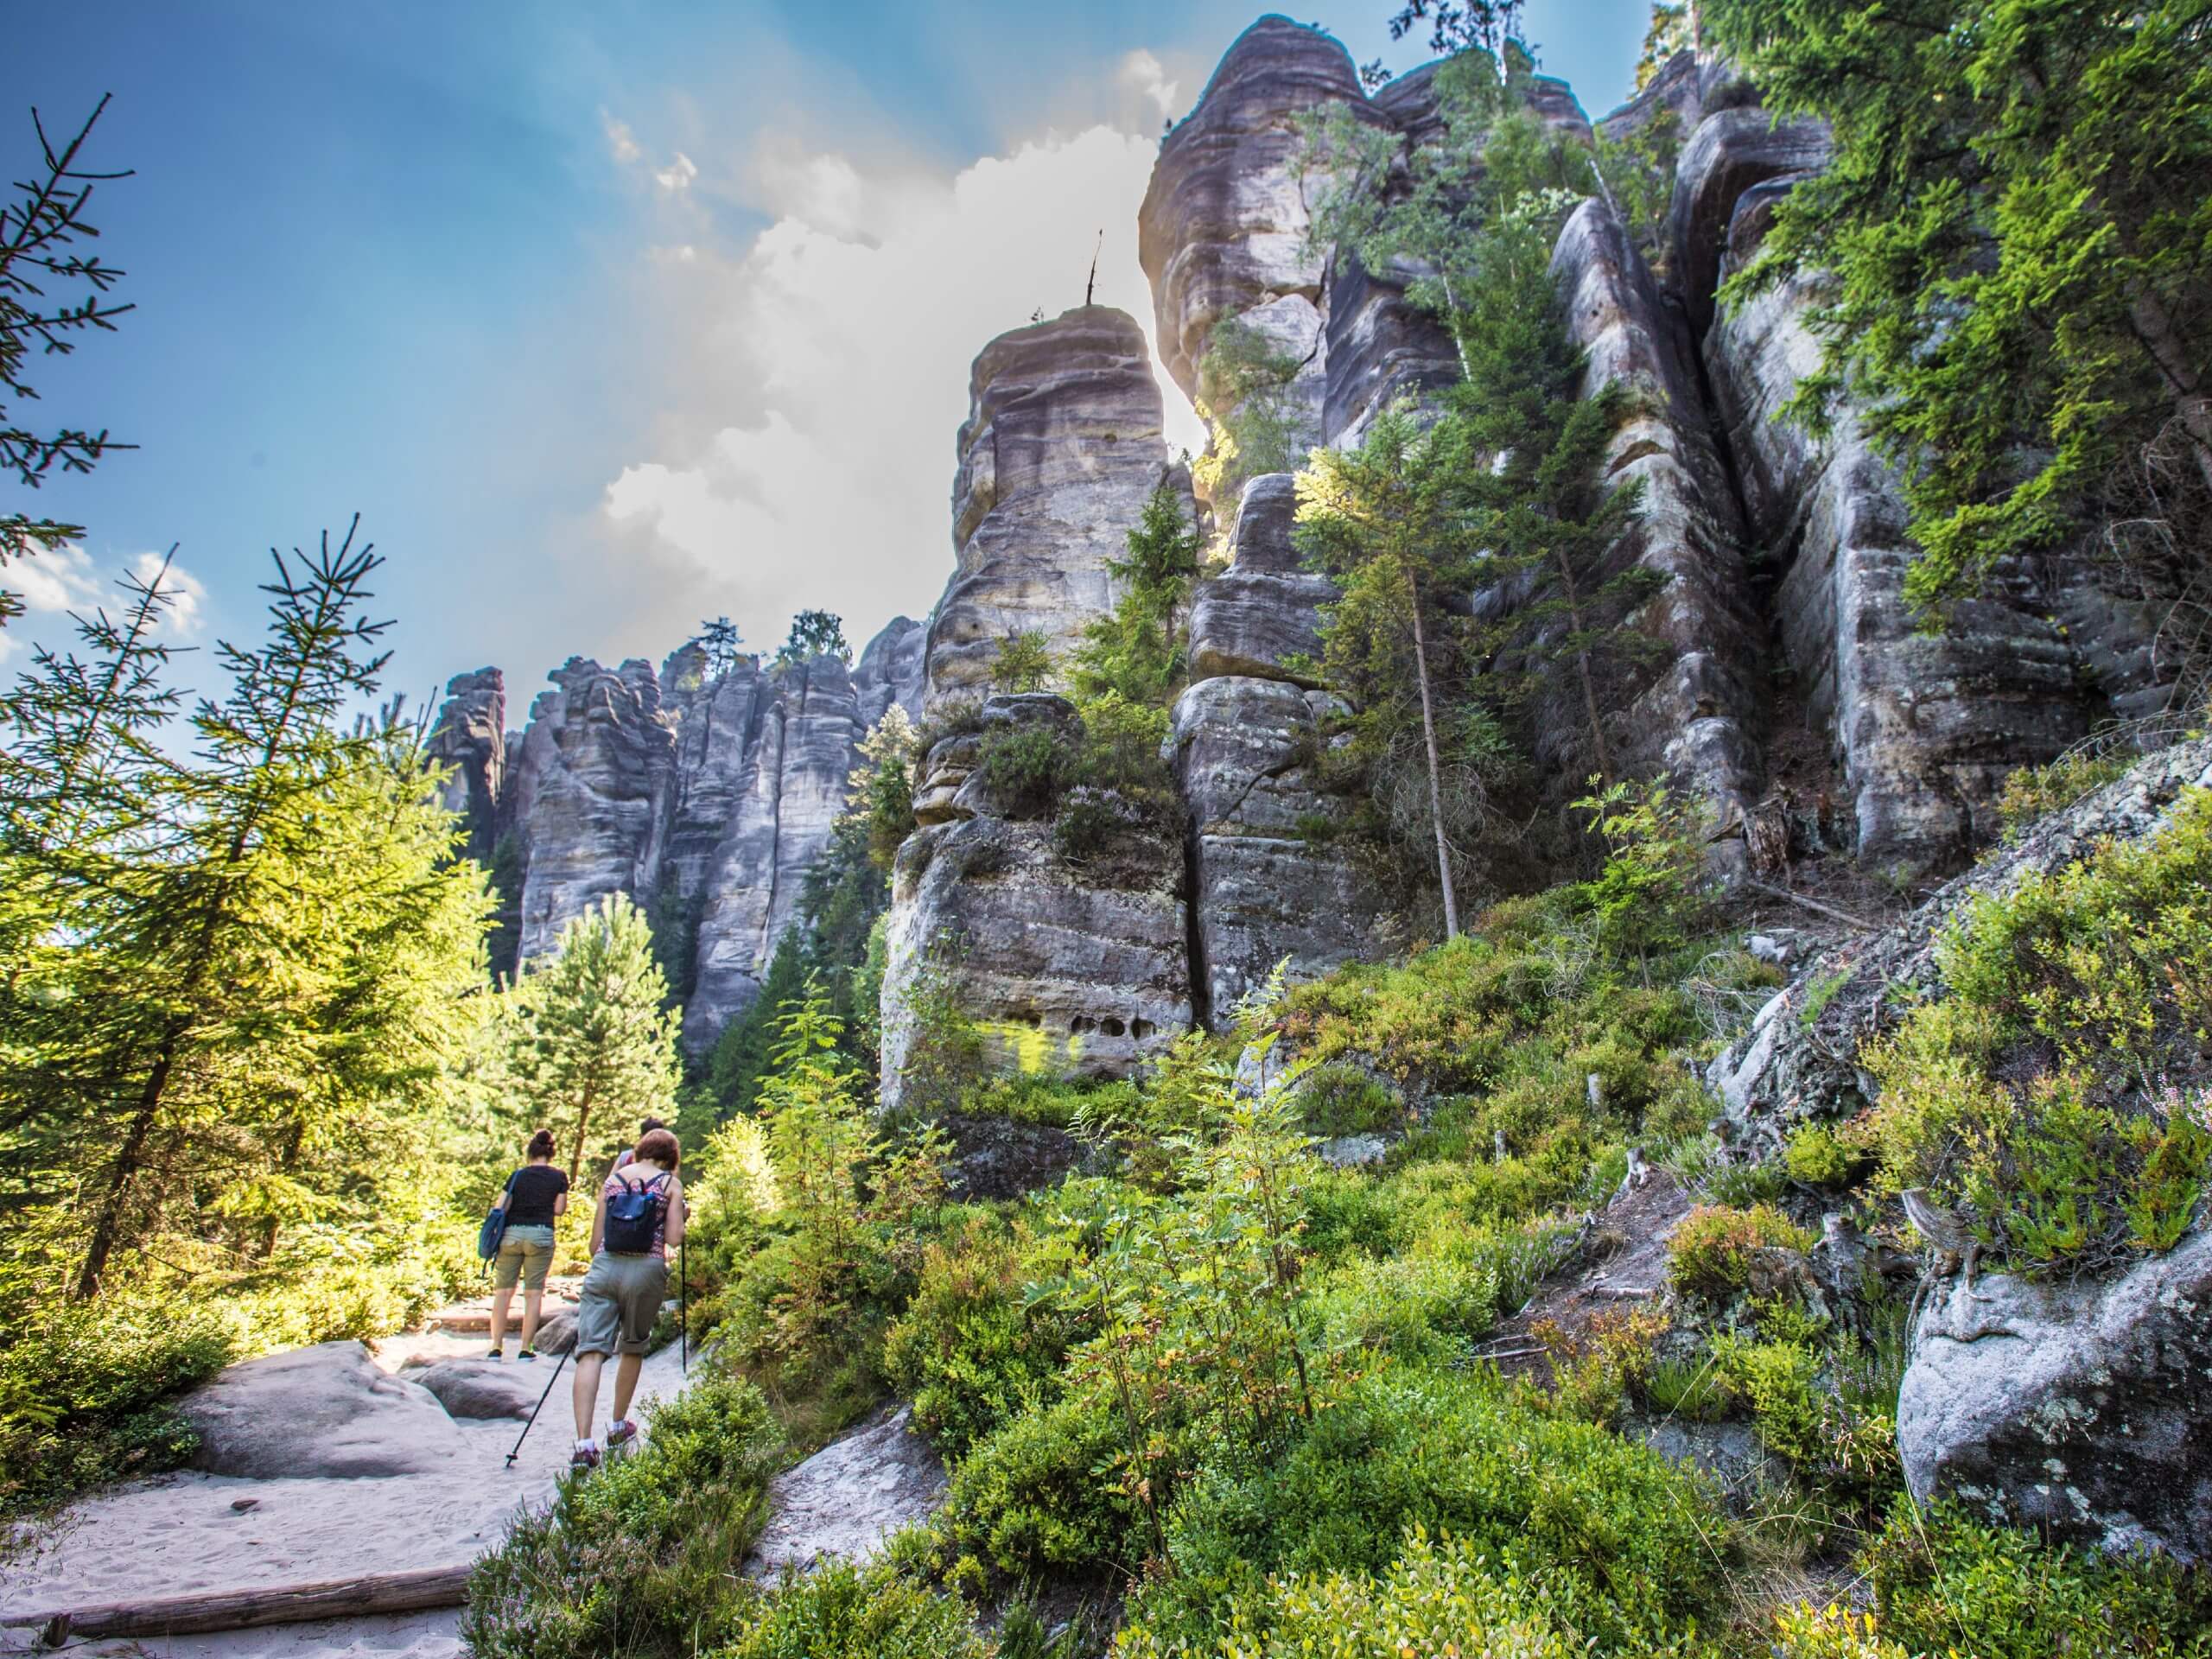 Hikers walking up among the rock formations in the Bohemian Paradise